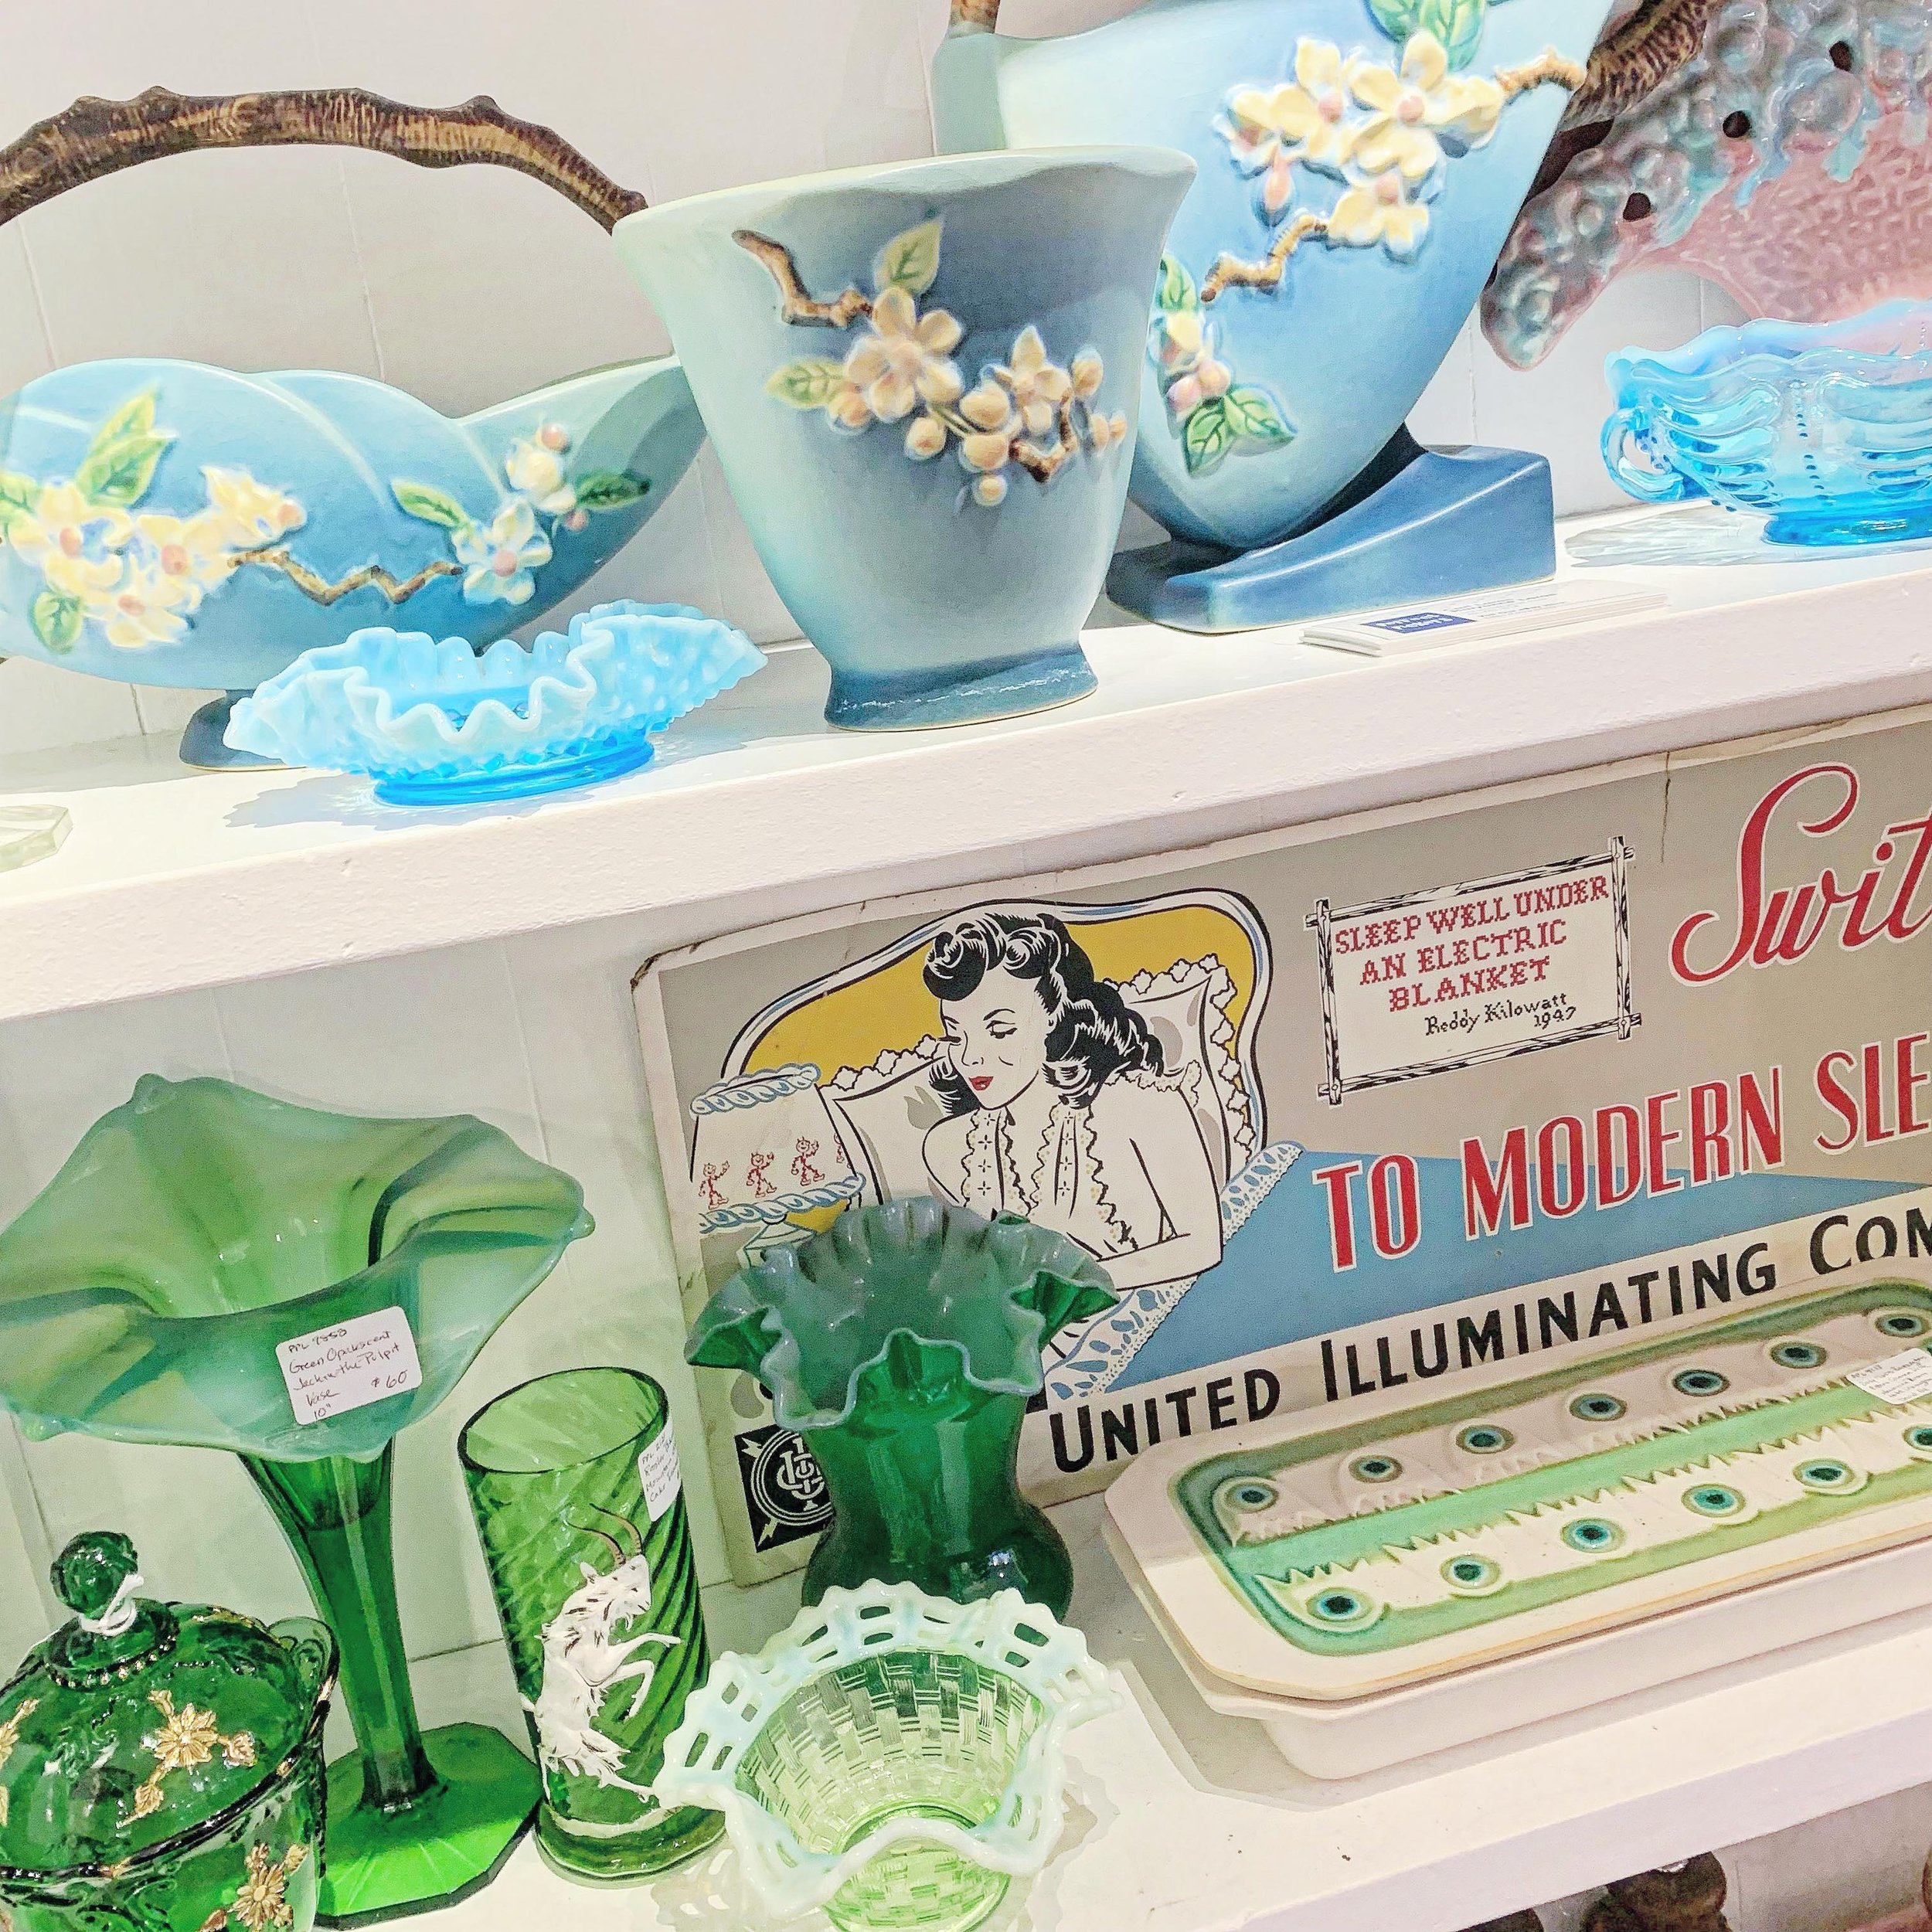 We are open all day Saturday for all your Last Minute Mum Gifts&hellip; Or&hellip; Bring your Mom with you and spend some time reminiscing while traveling from room to room packed with nostalgic finds! (Turns out&hellip; Moms&rsquo; Favorite Gift has